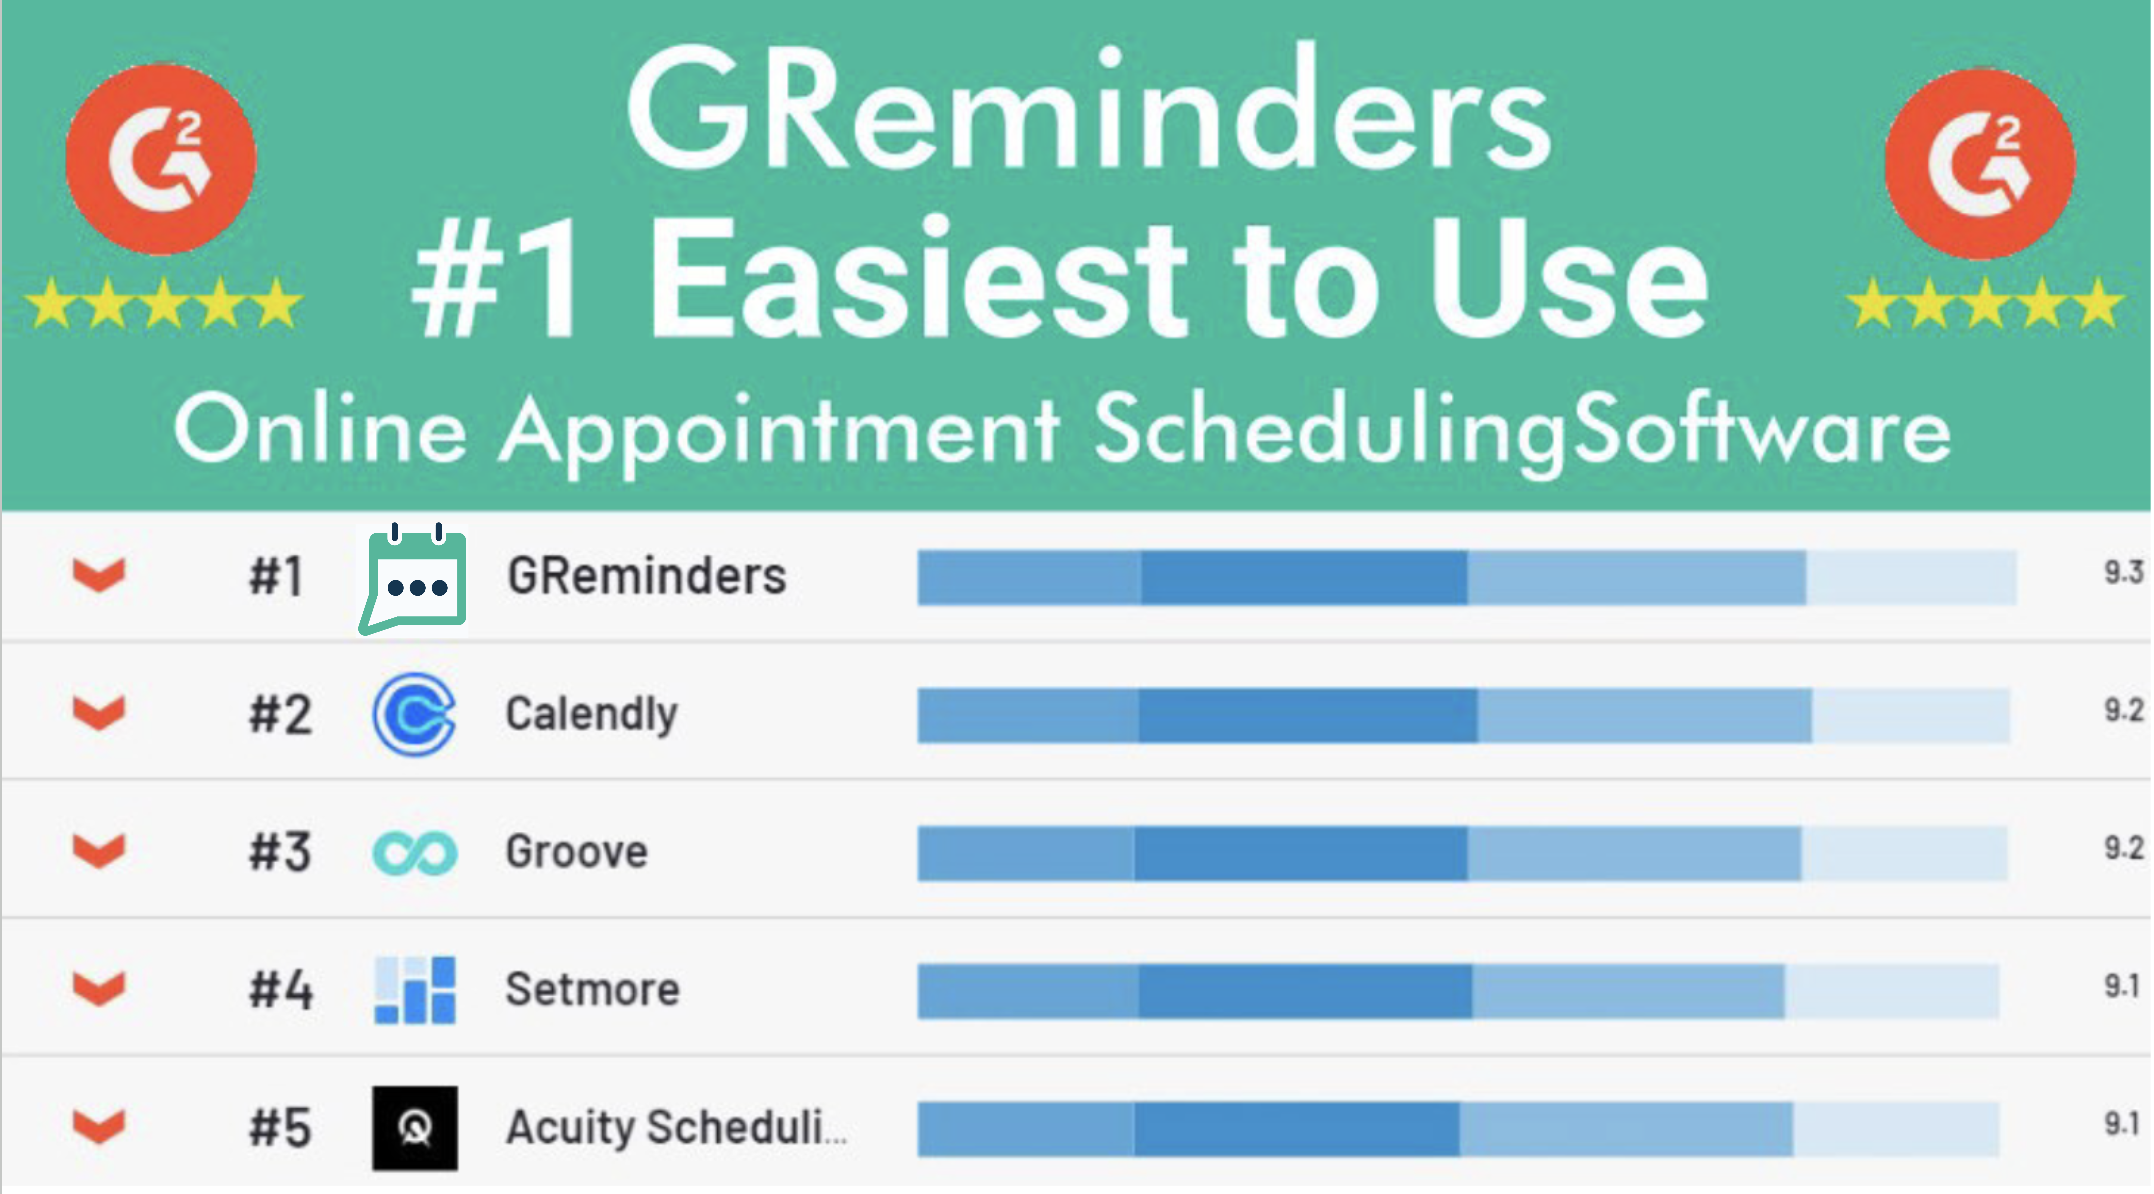 Easiest to Use Online Appointment Scheduling Software